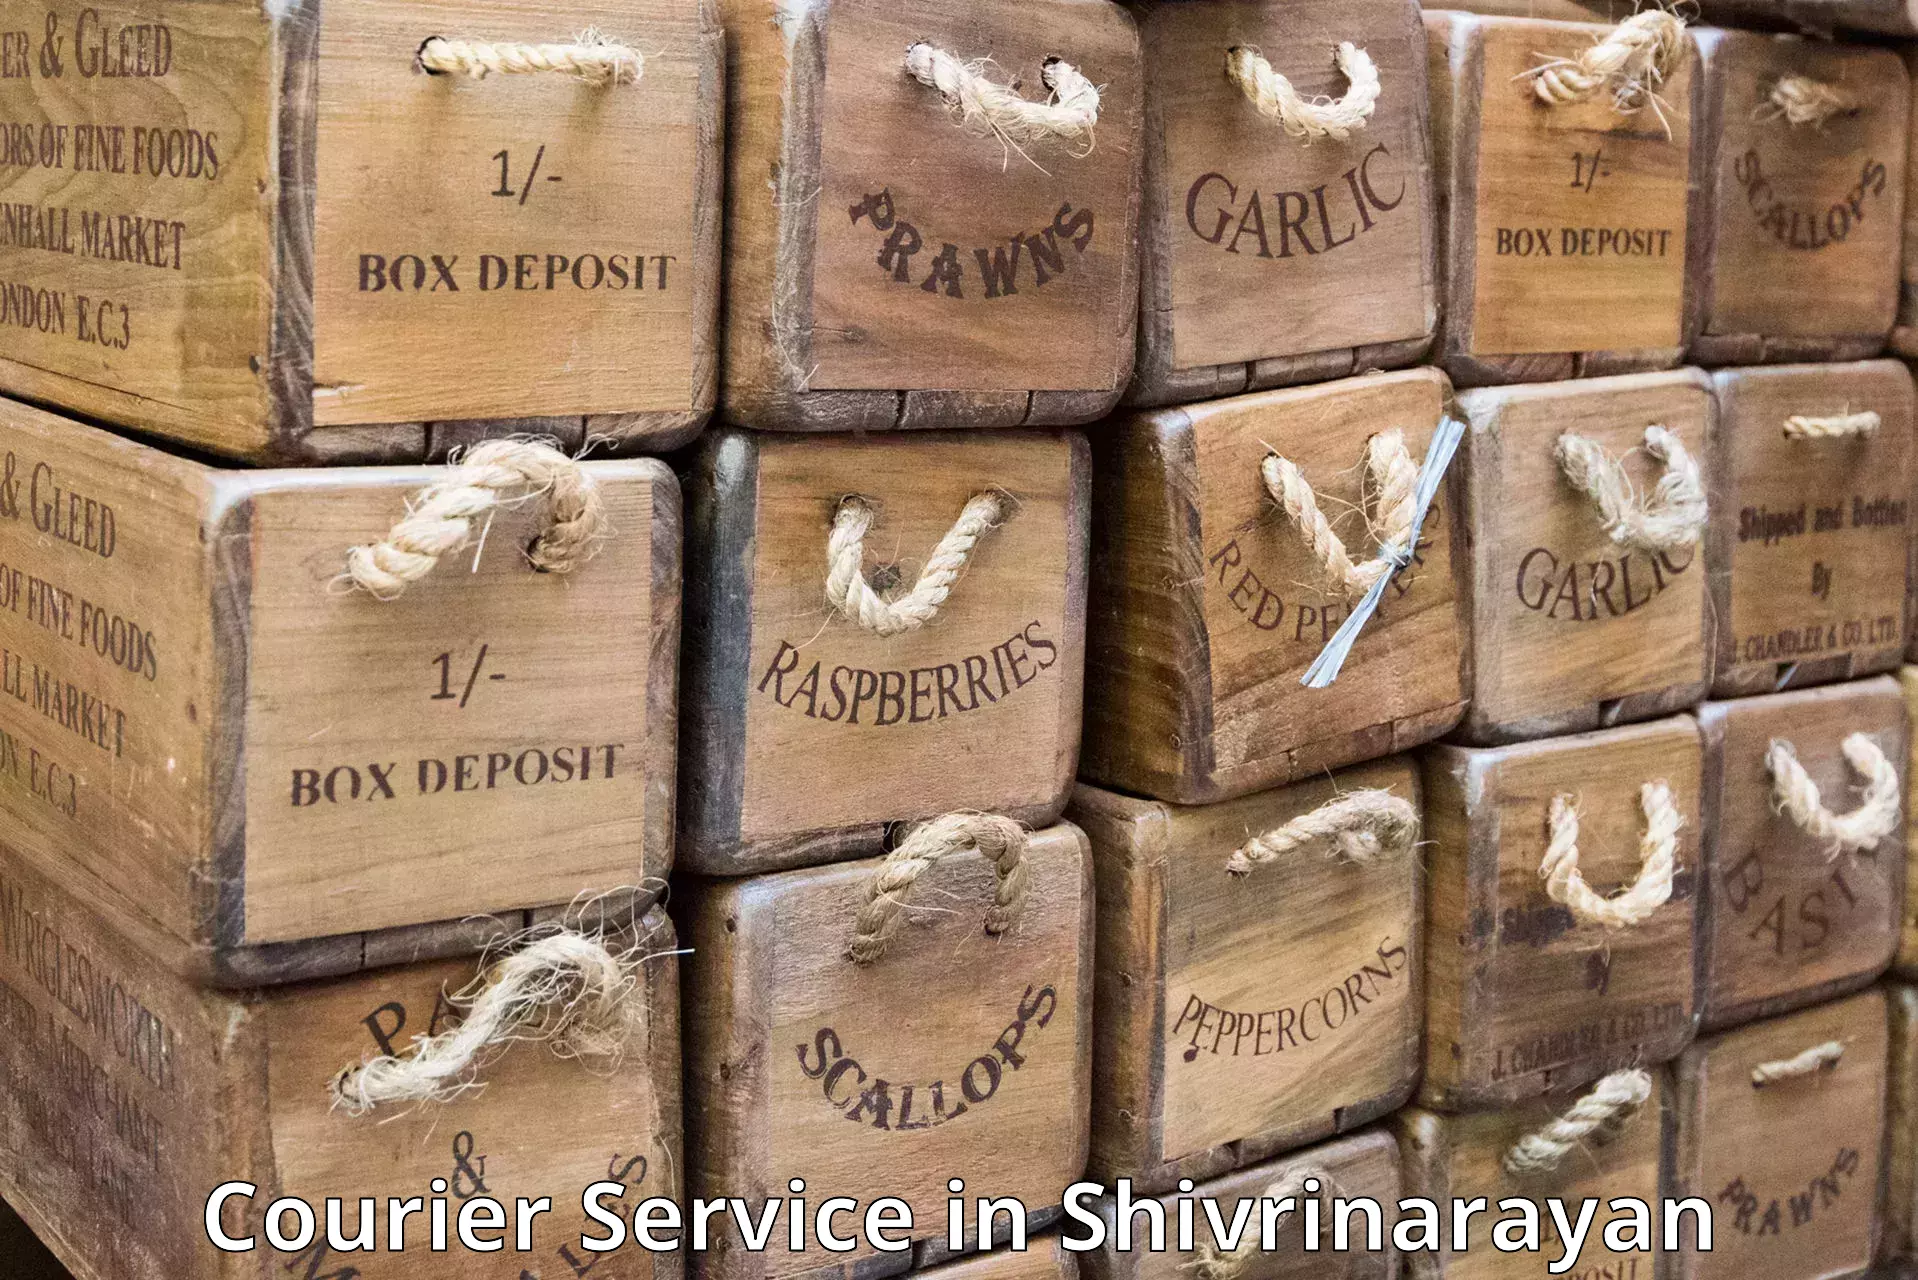 Residential courier service in Shivrinarayan